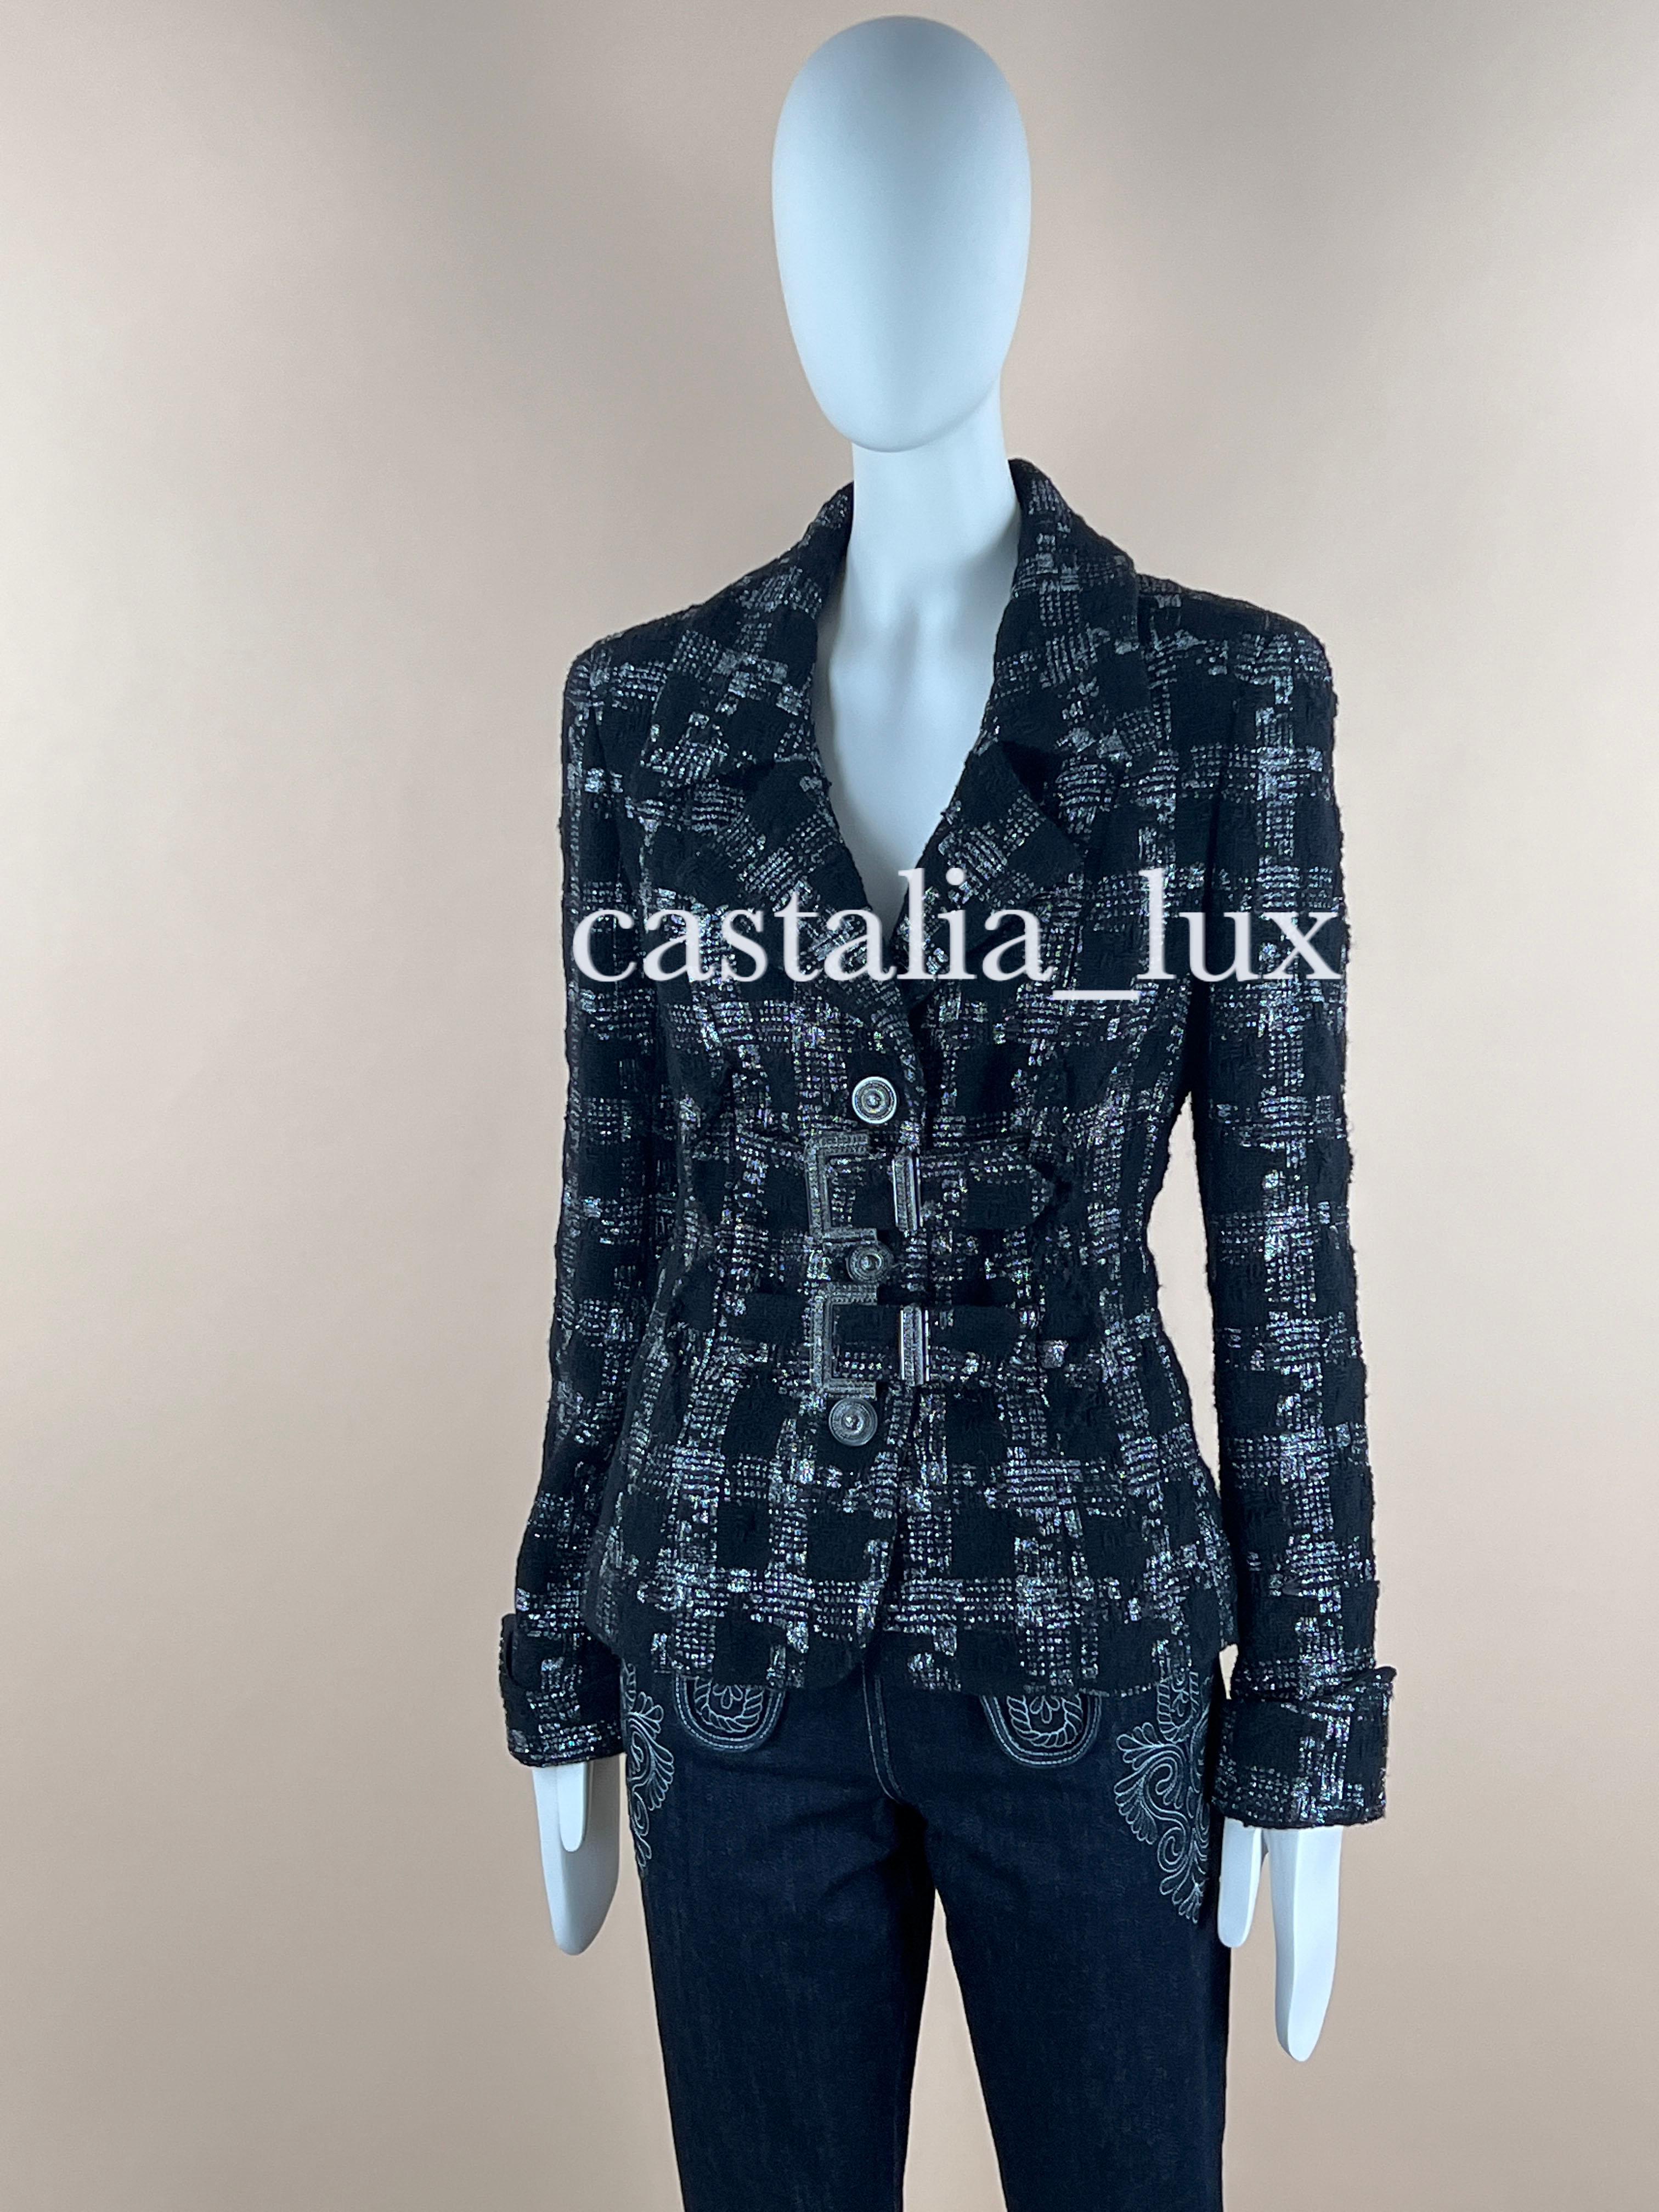 New Chanel iconic black tweed jacket. Timeless piece, perfect investment.
- lined row belt with CC logo buckles at front at back. Size mark 40 fr.
- made of beautiful black lesage tweed with delicate shimmer
- CC logo buttons
- full silk lining with